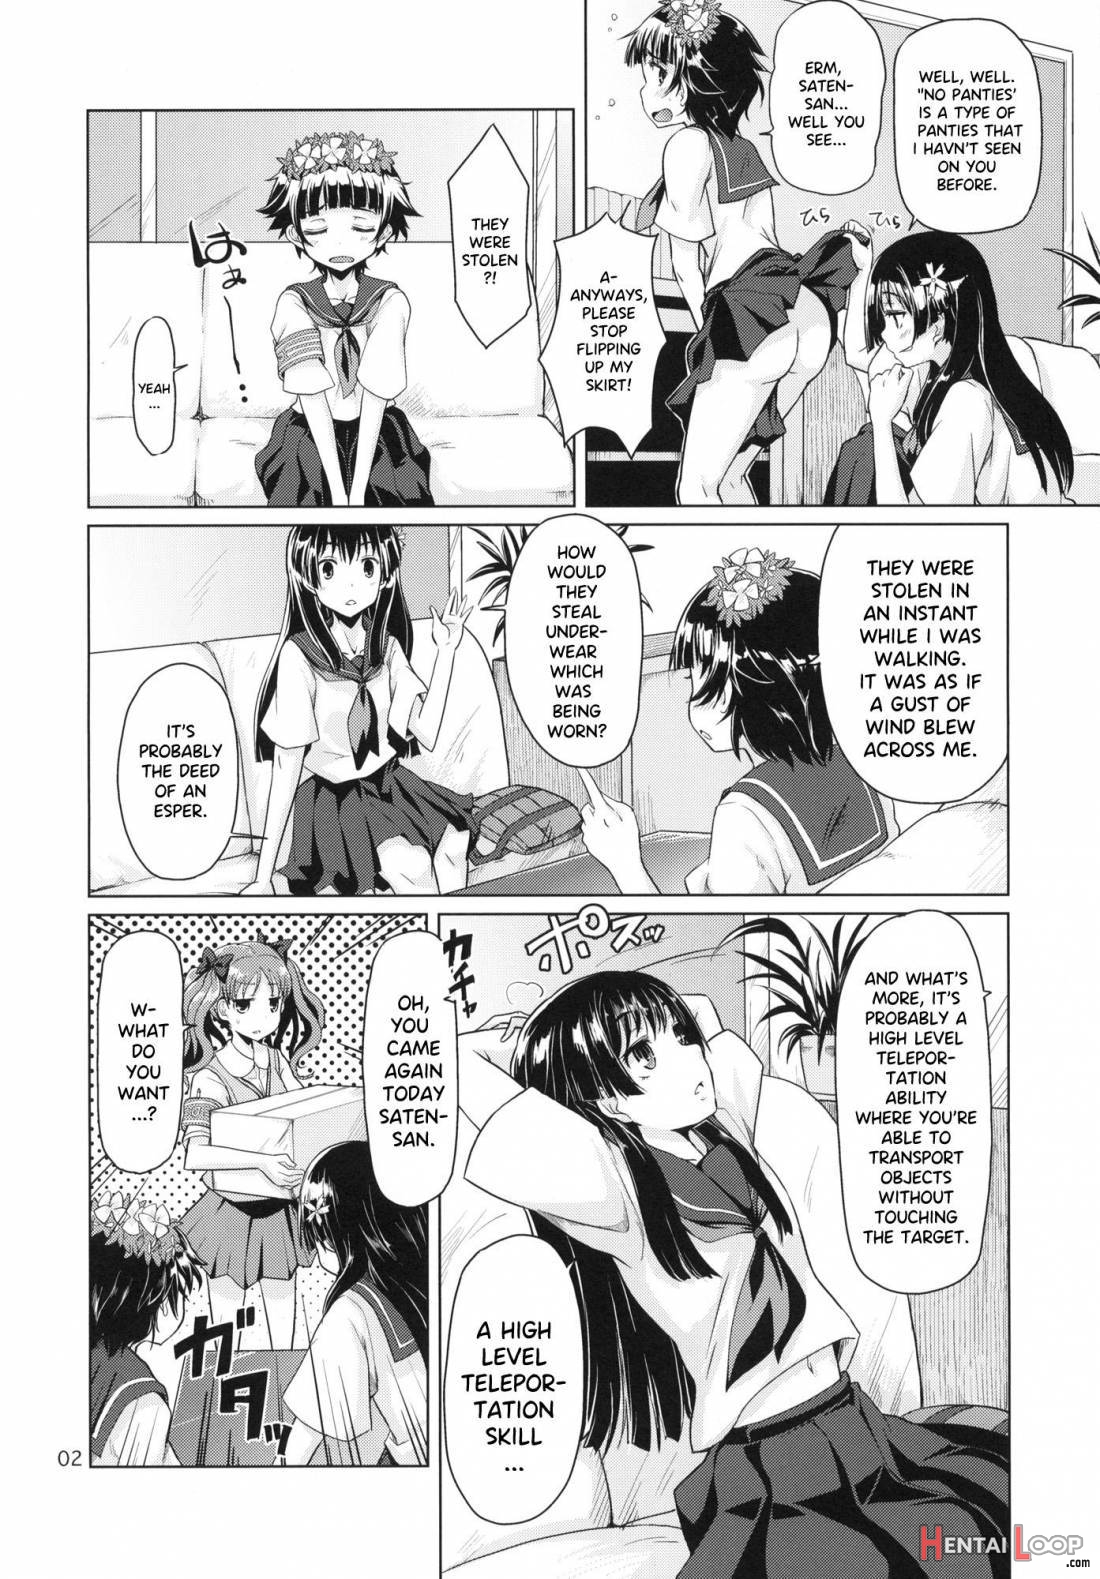 i.Saten page 3